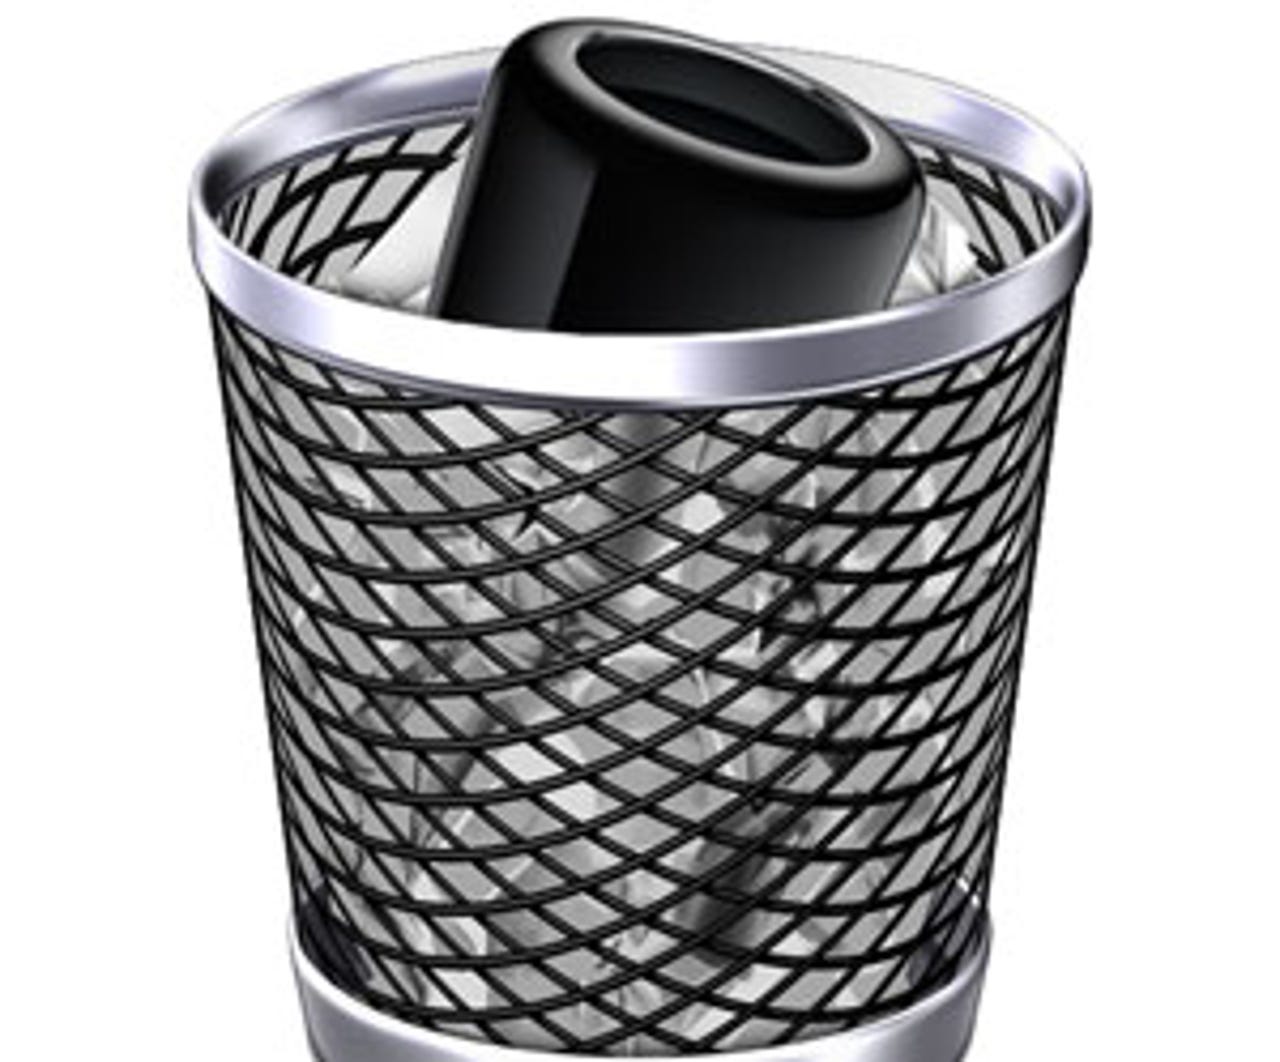 Don't hold your breath for a new Mac Pro